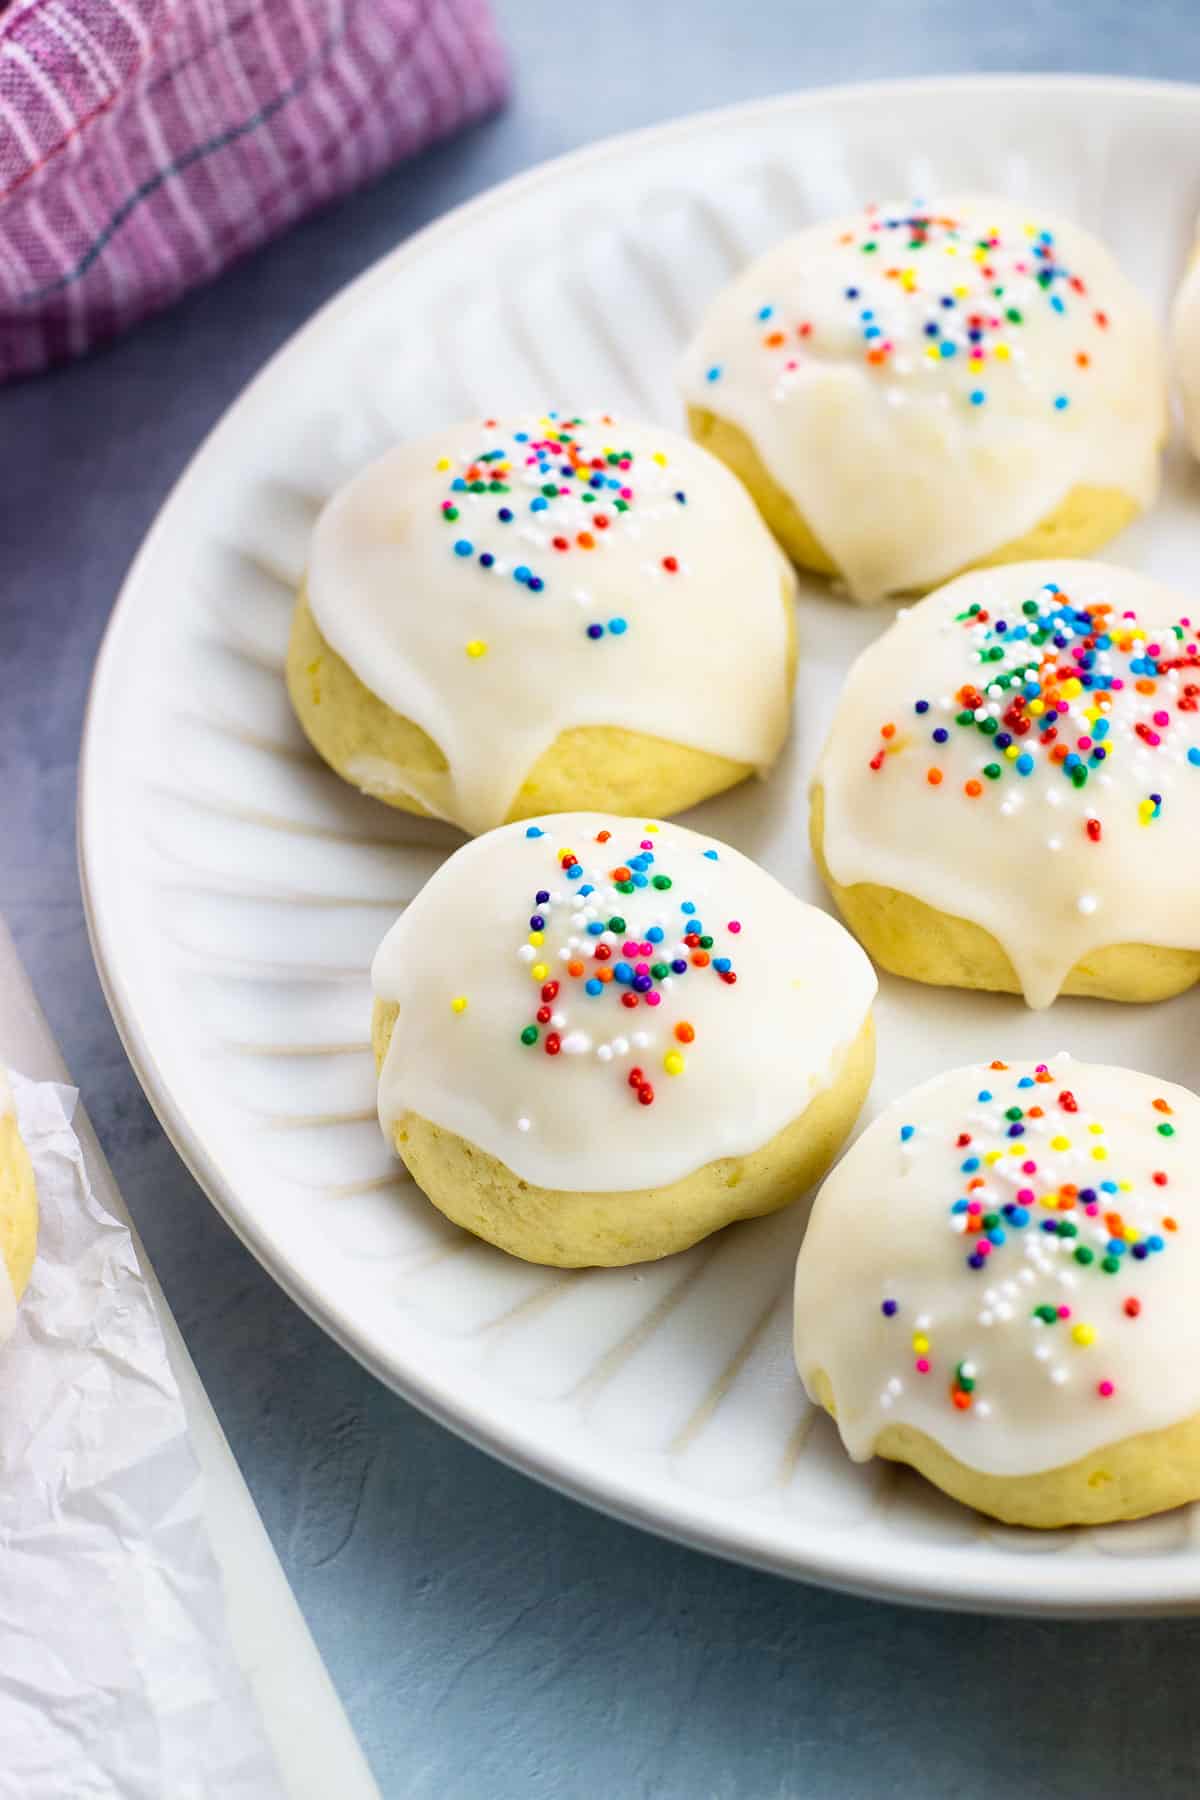 A plate of glazed Italian lemon drop cookies decorated with rainbow nonpareils.